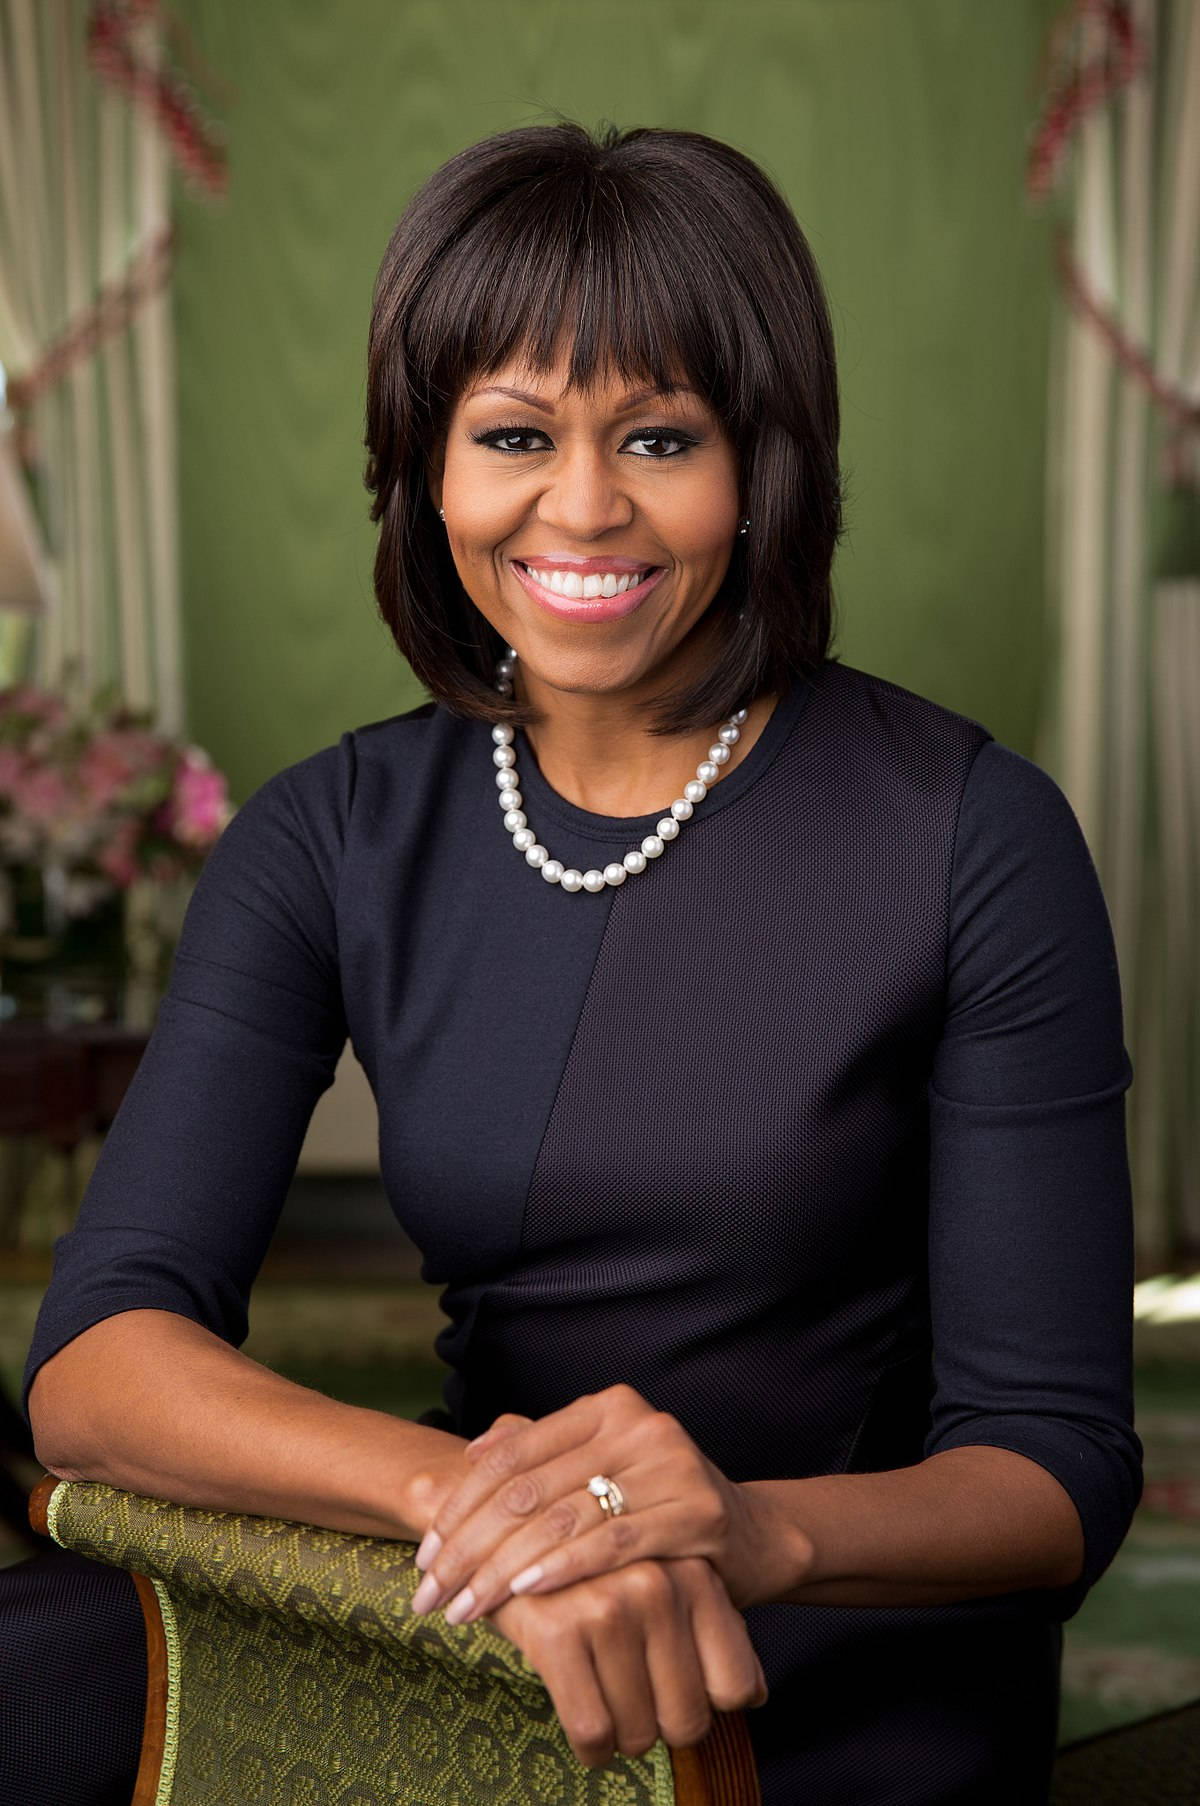 Michelle Obama With Bangs Wallpaper